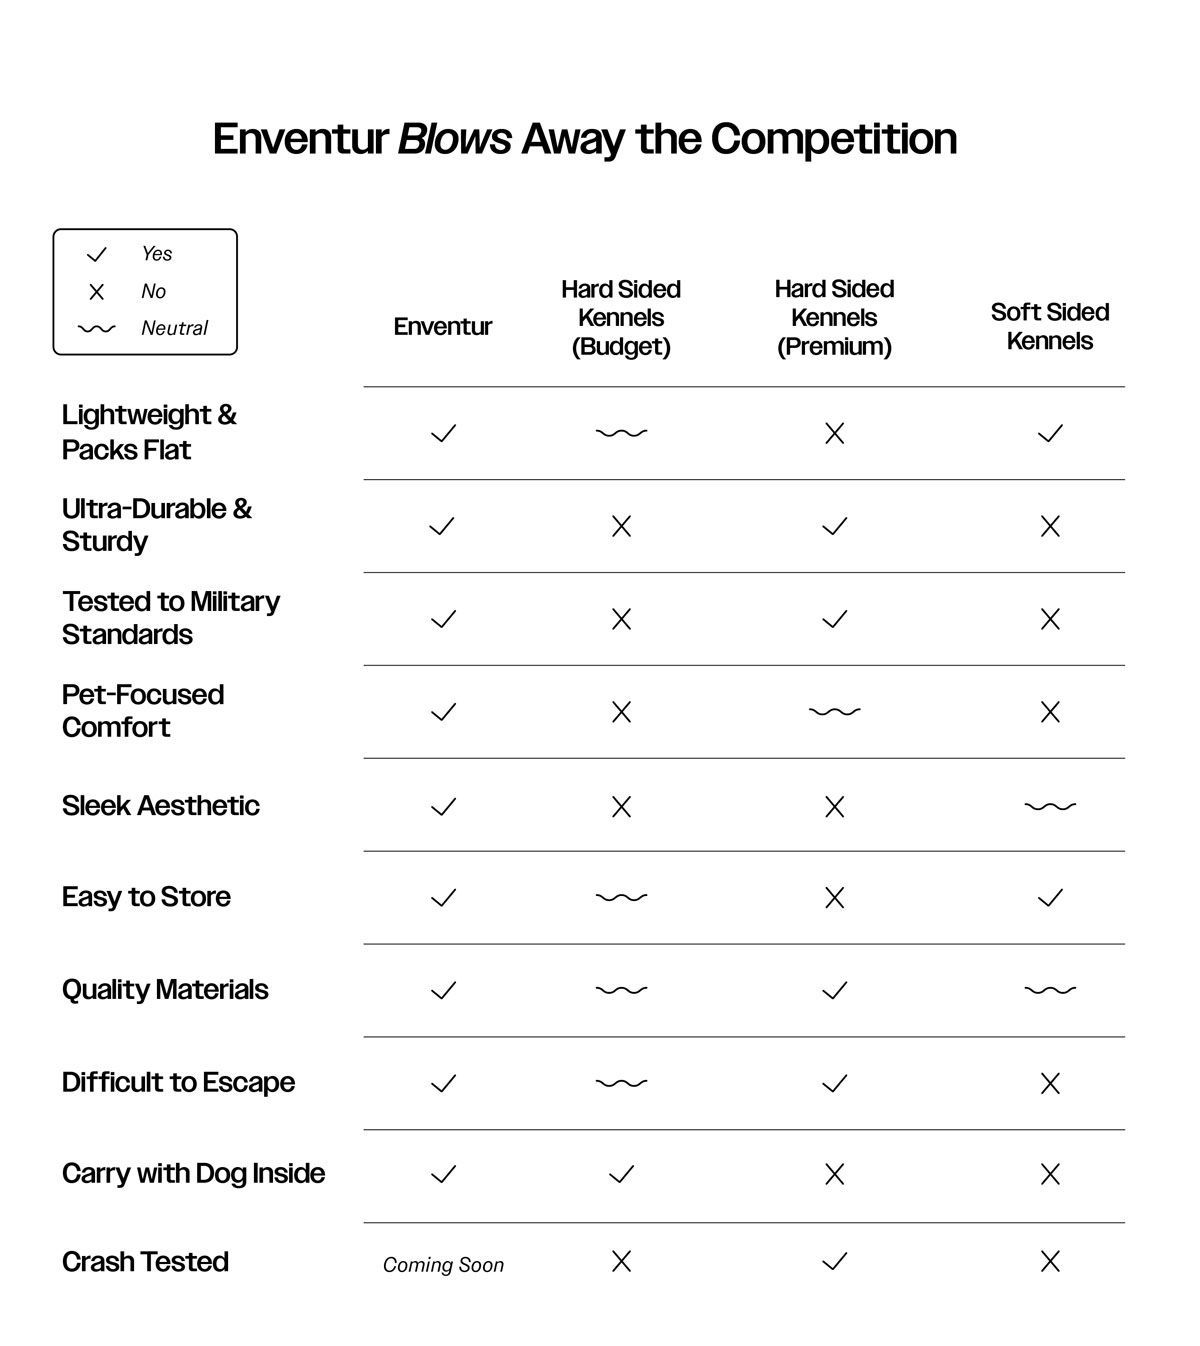 A table showing that Enventur is superior to standard travel kennels